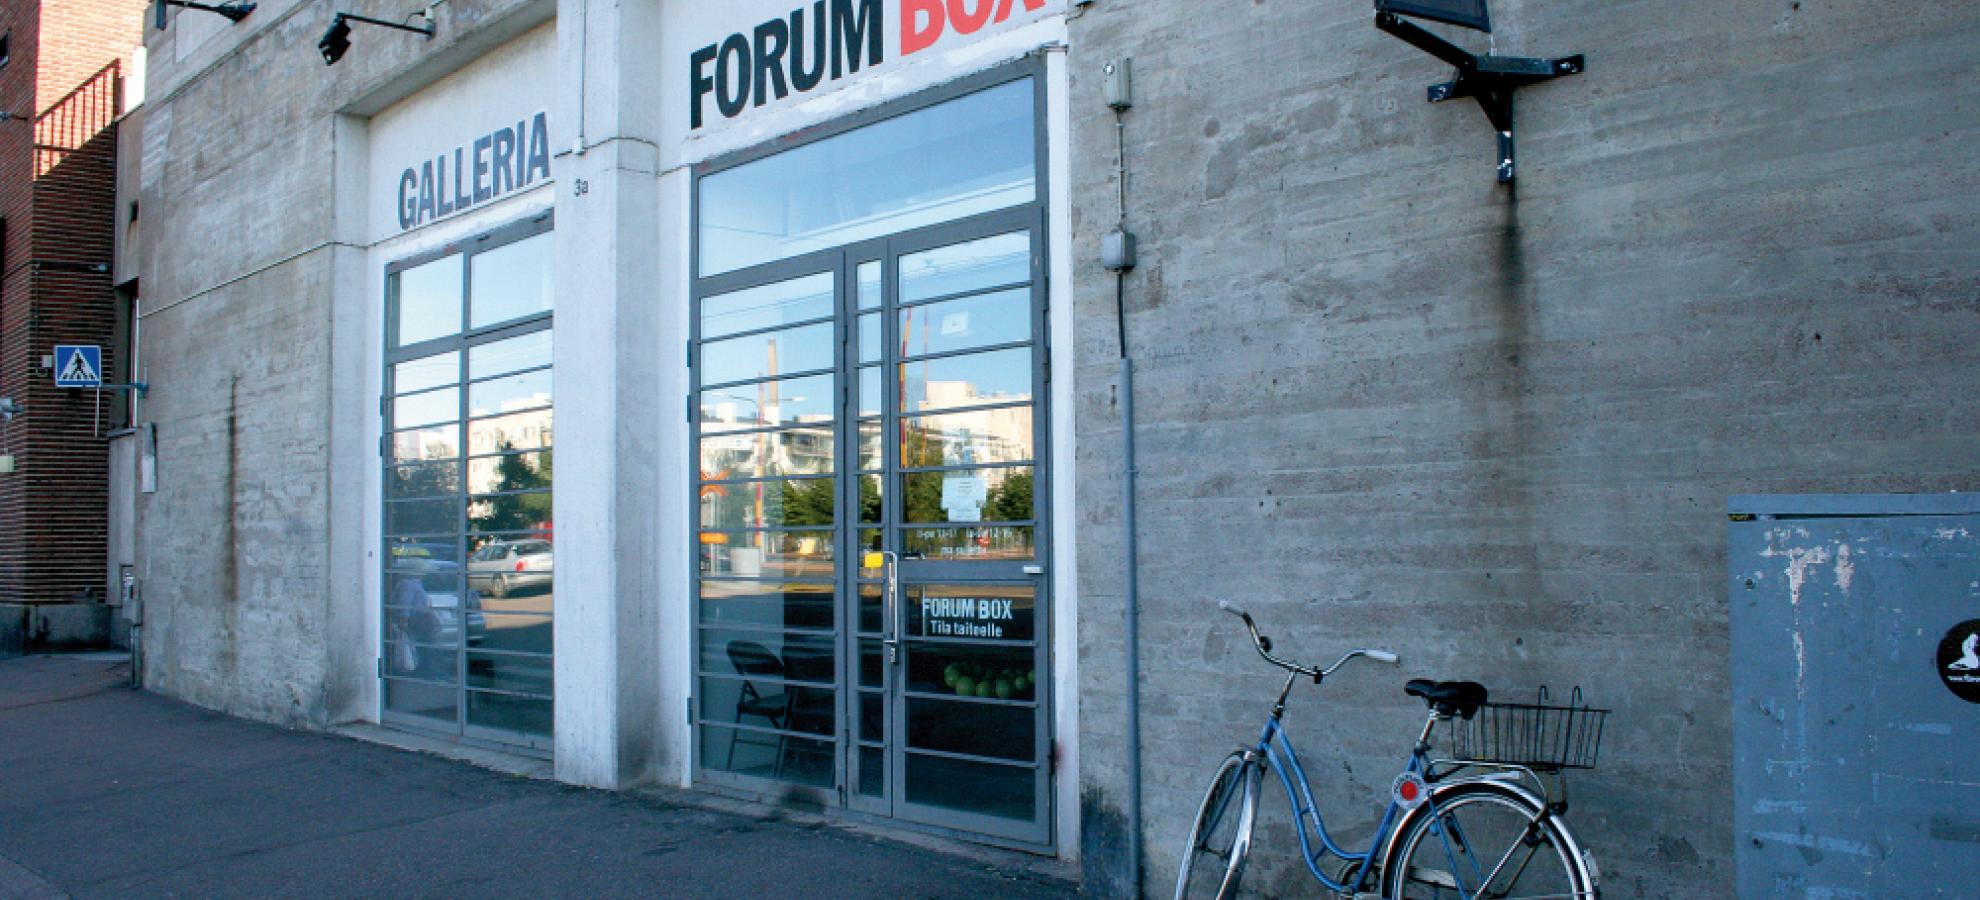 Entrance way to Forum Box art gallery, set within a grey concrete wall, bicycle leaning against the wall.